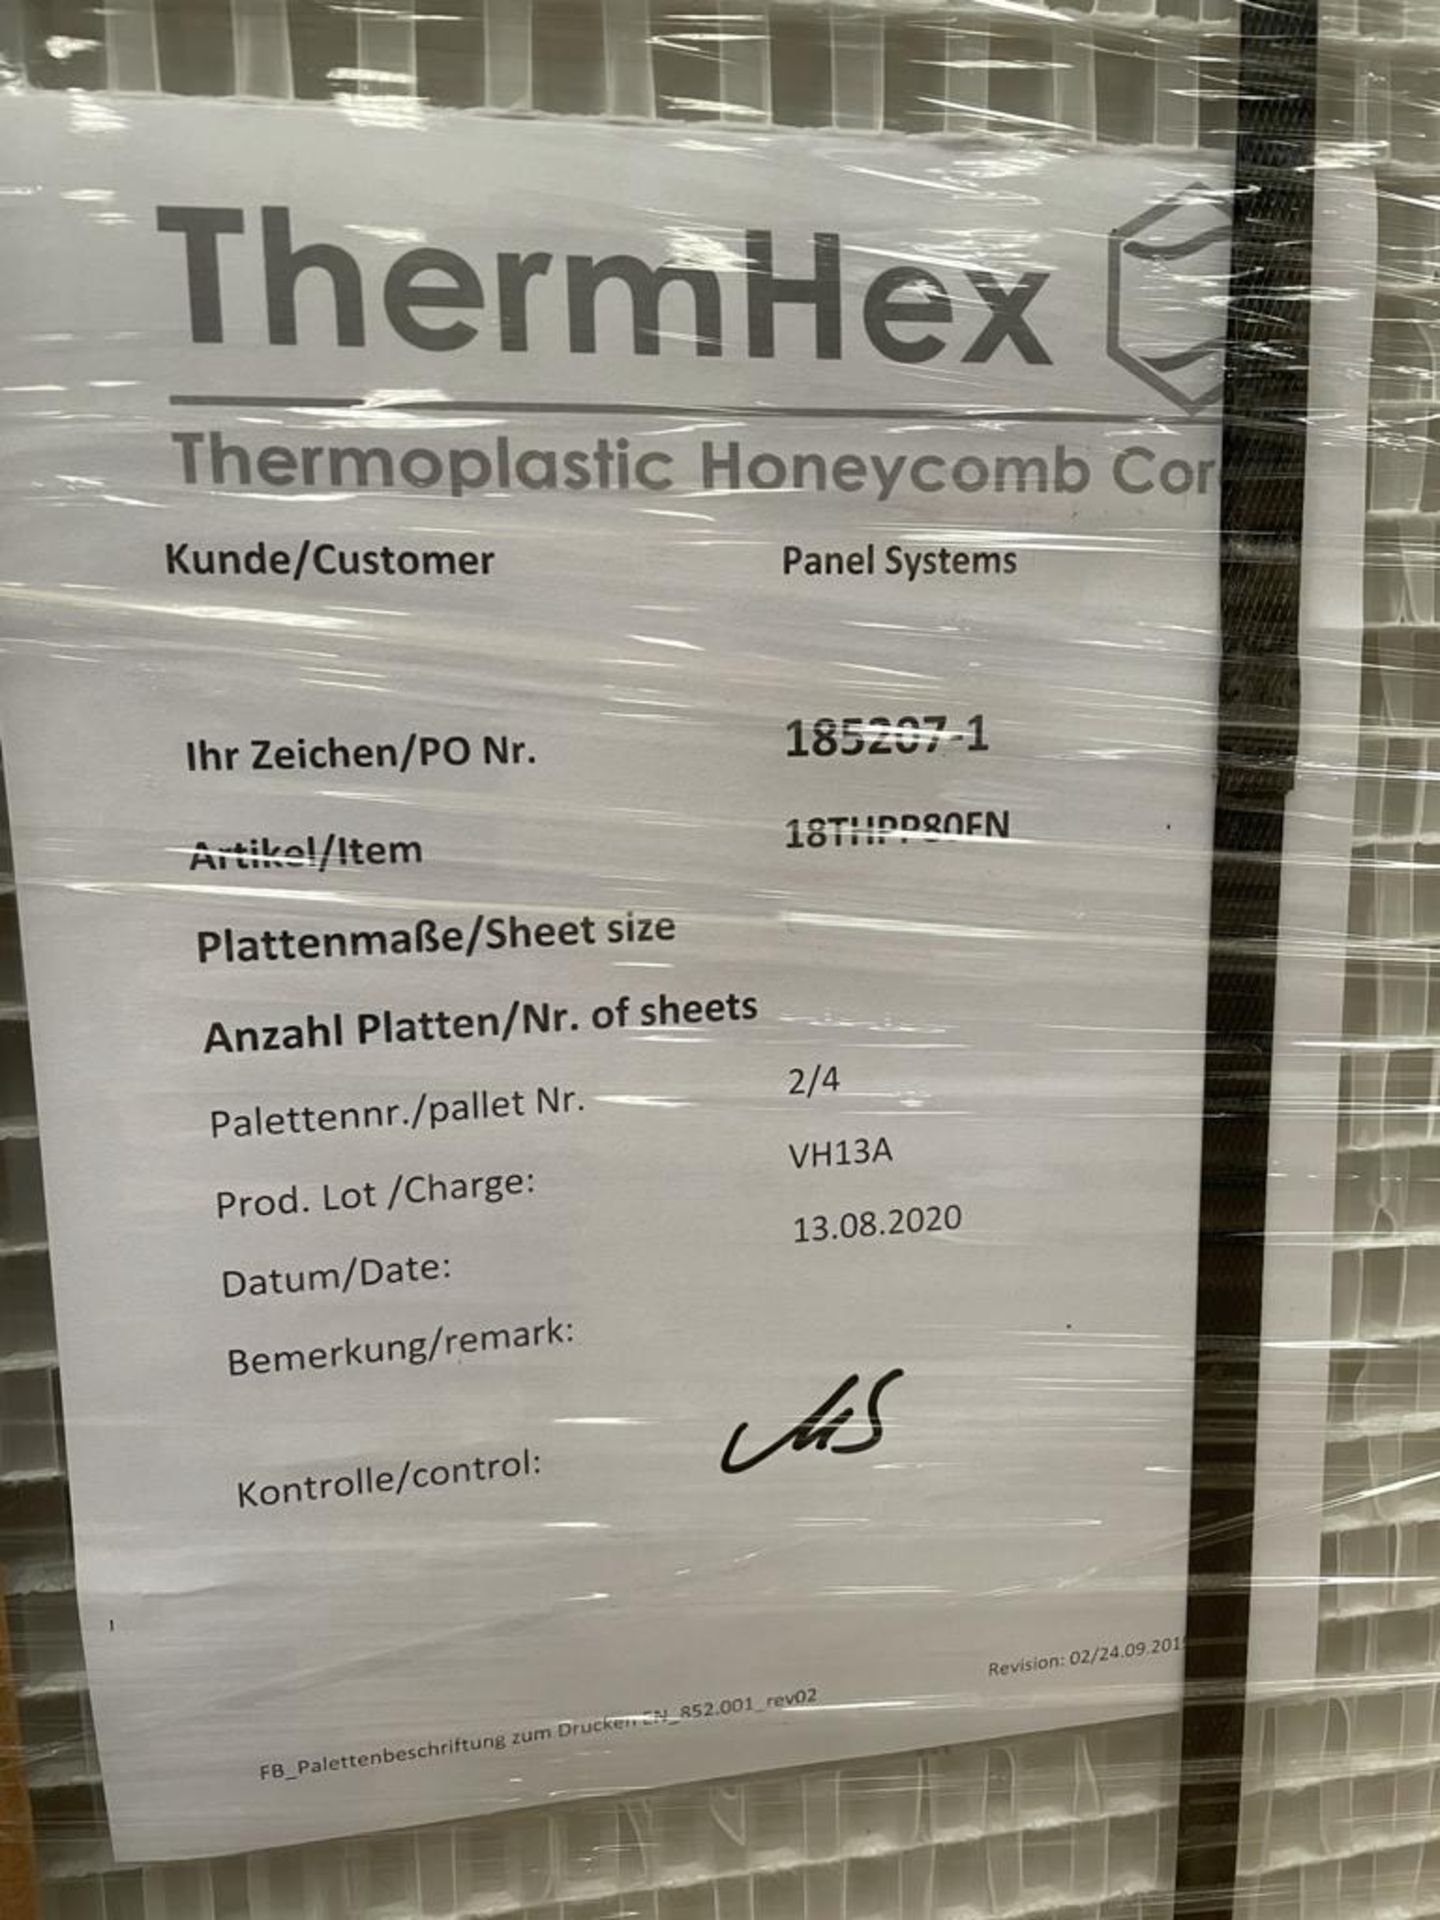 6 x ThermHex Thermoplastic Honeycomb Core Panels - Size 3175 x 1210 x 20mm - New Stock - Lightweight - Image 2 of 7